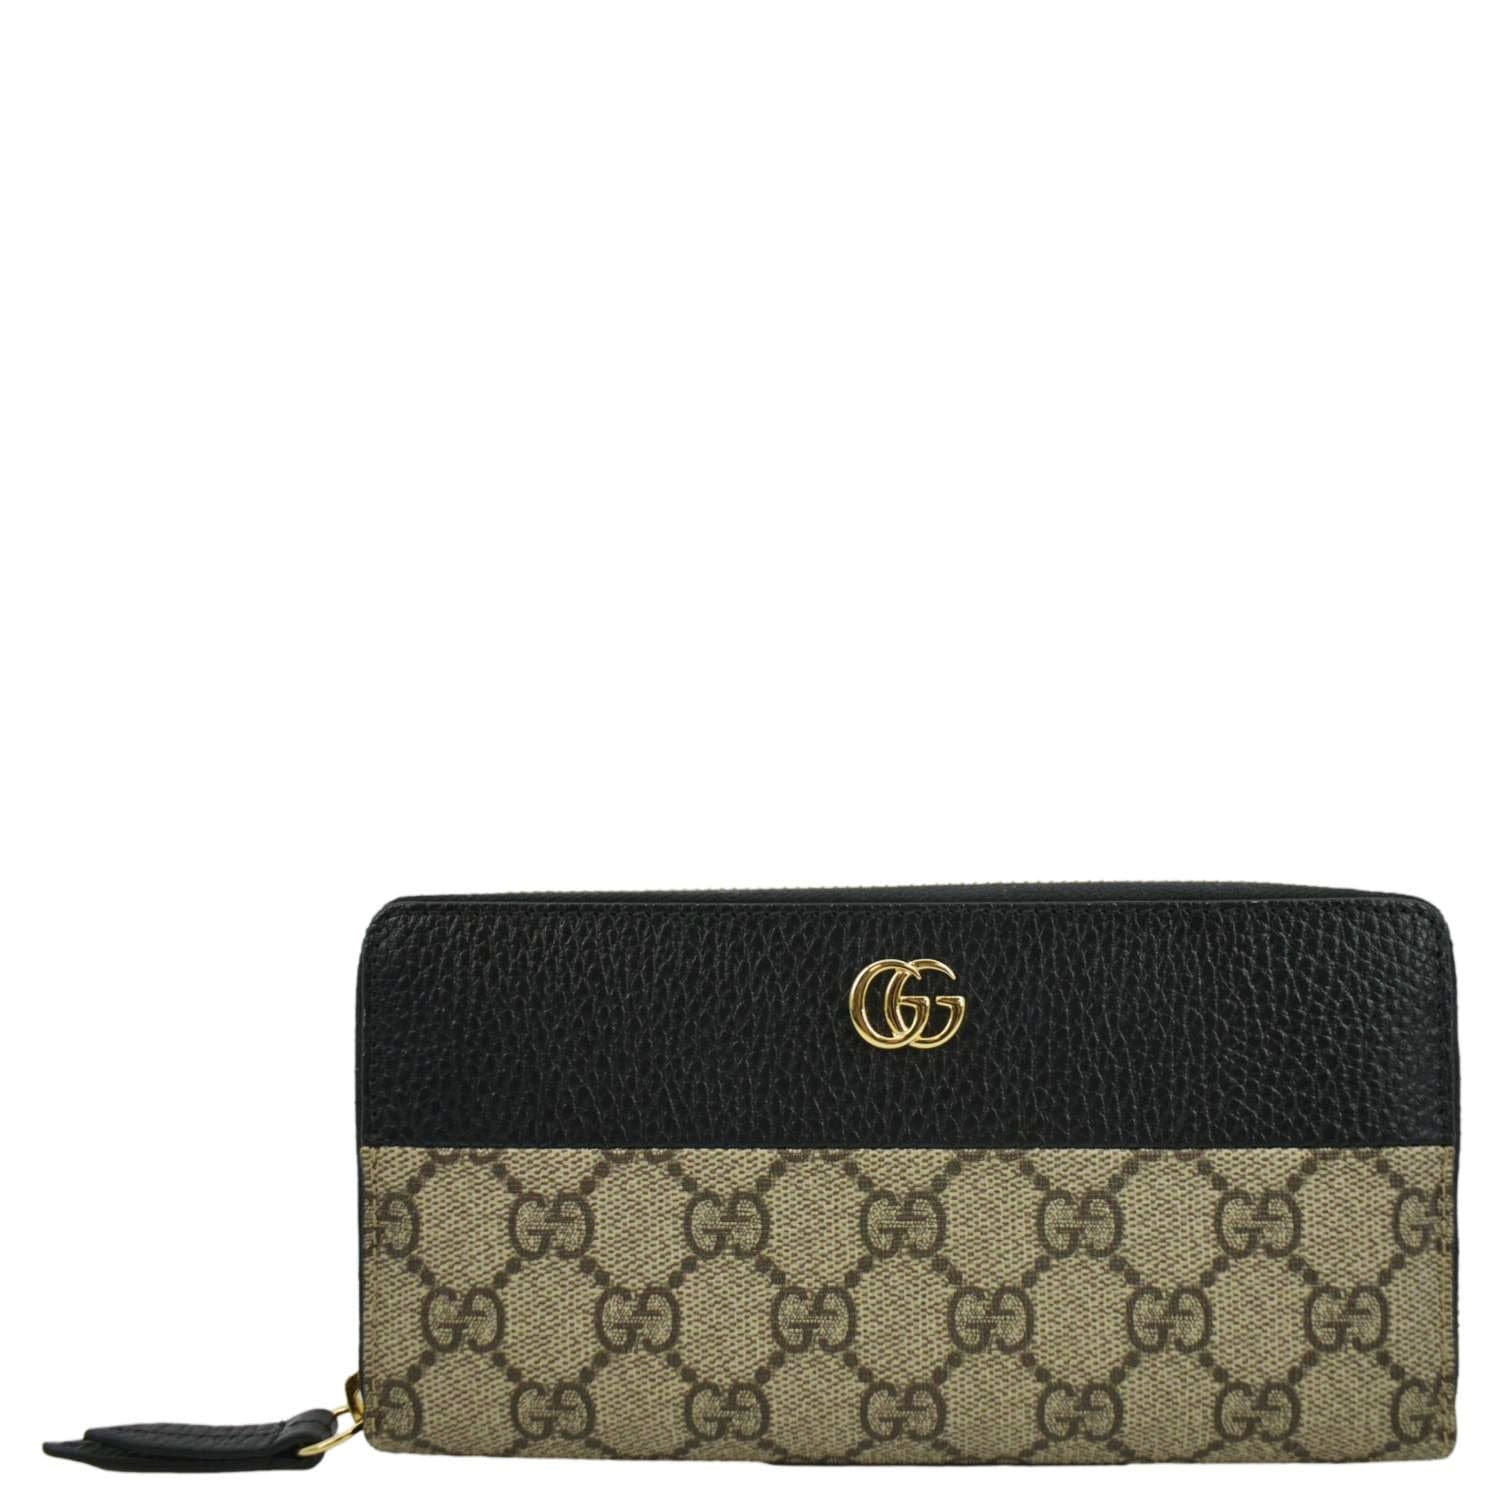 GG Marmont zip around wallet in light pink leather and Supreme